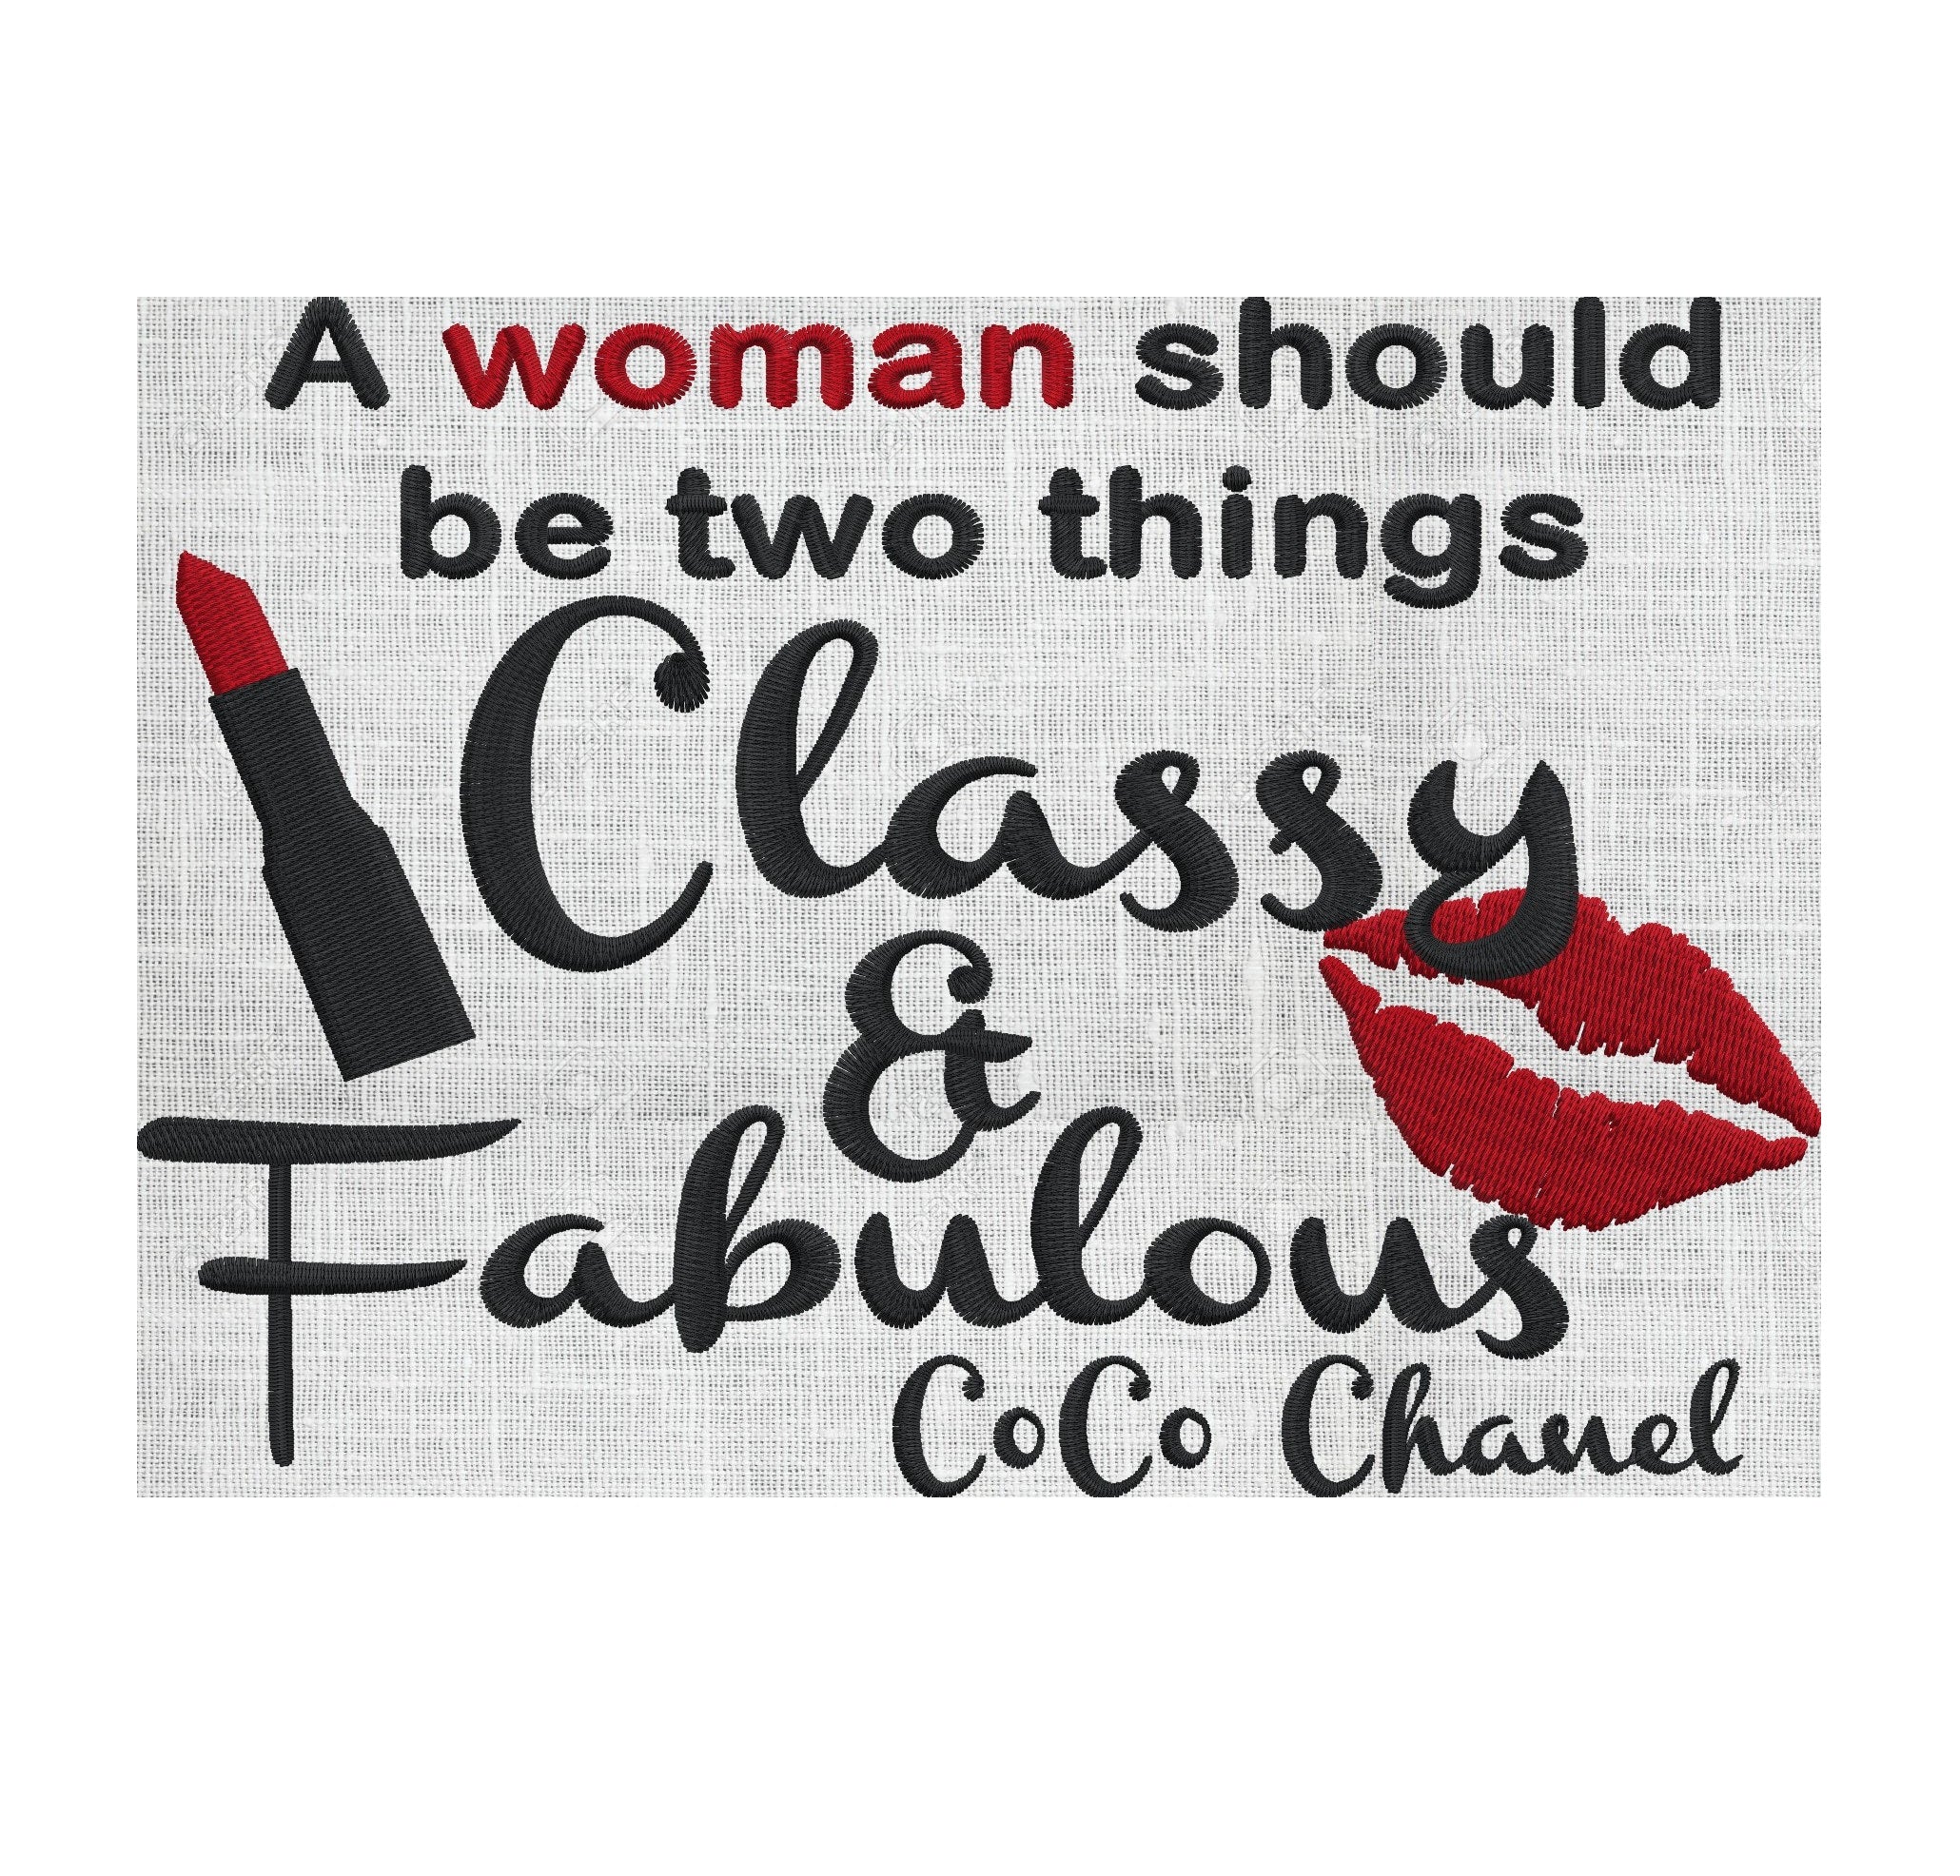 Coco Channel quote A woman should be 2 things Classy & Fabulous  EMBROIDERY DESIGN FILE - Instant download - Dst Hus Jef Pes VP3 Exp